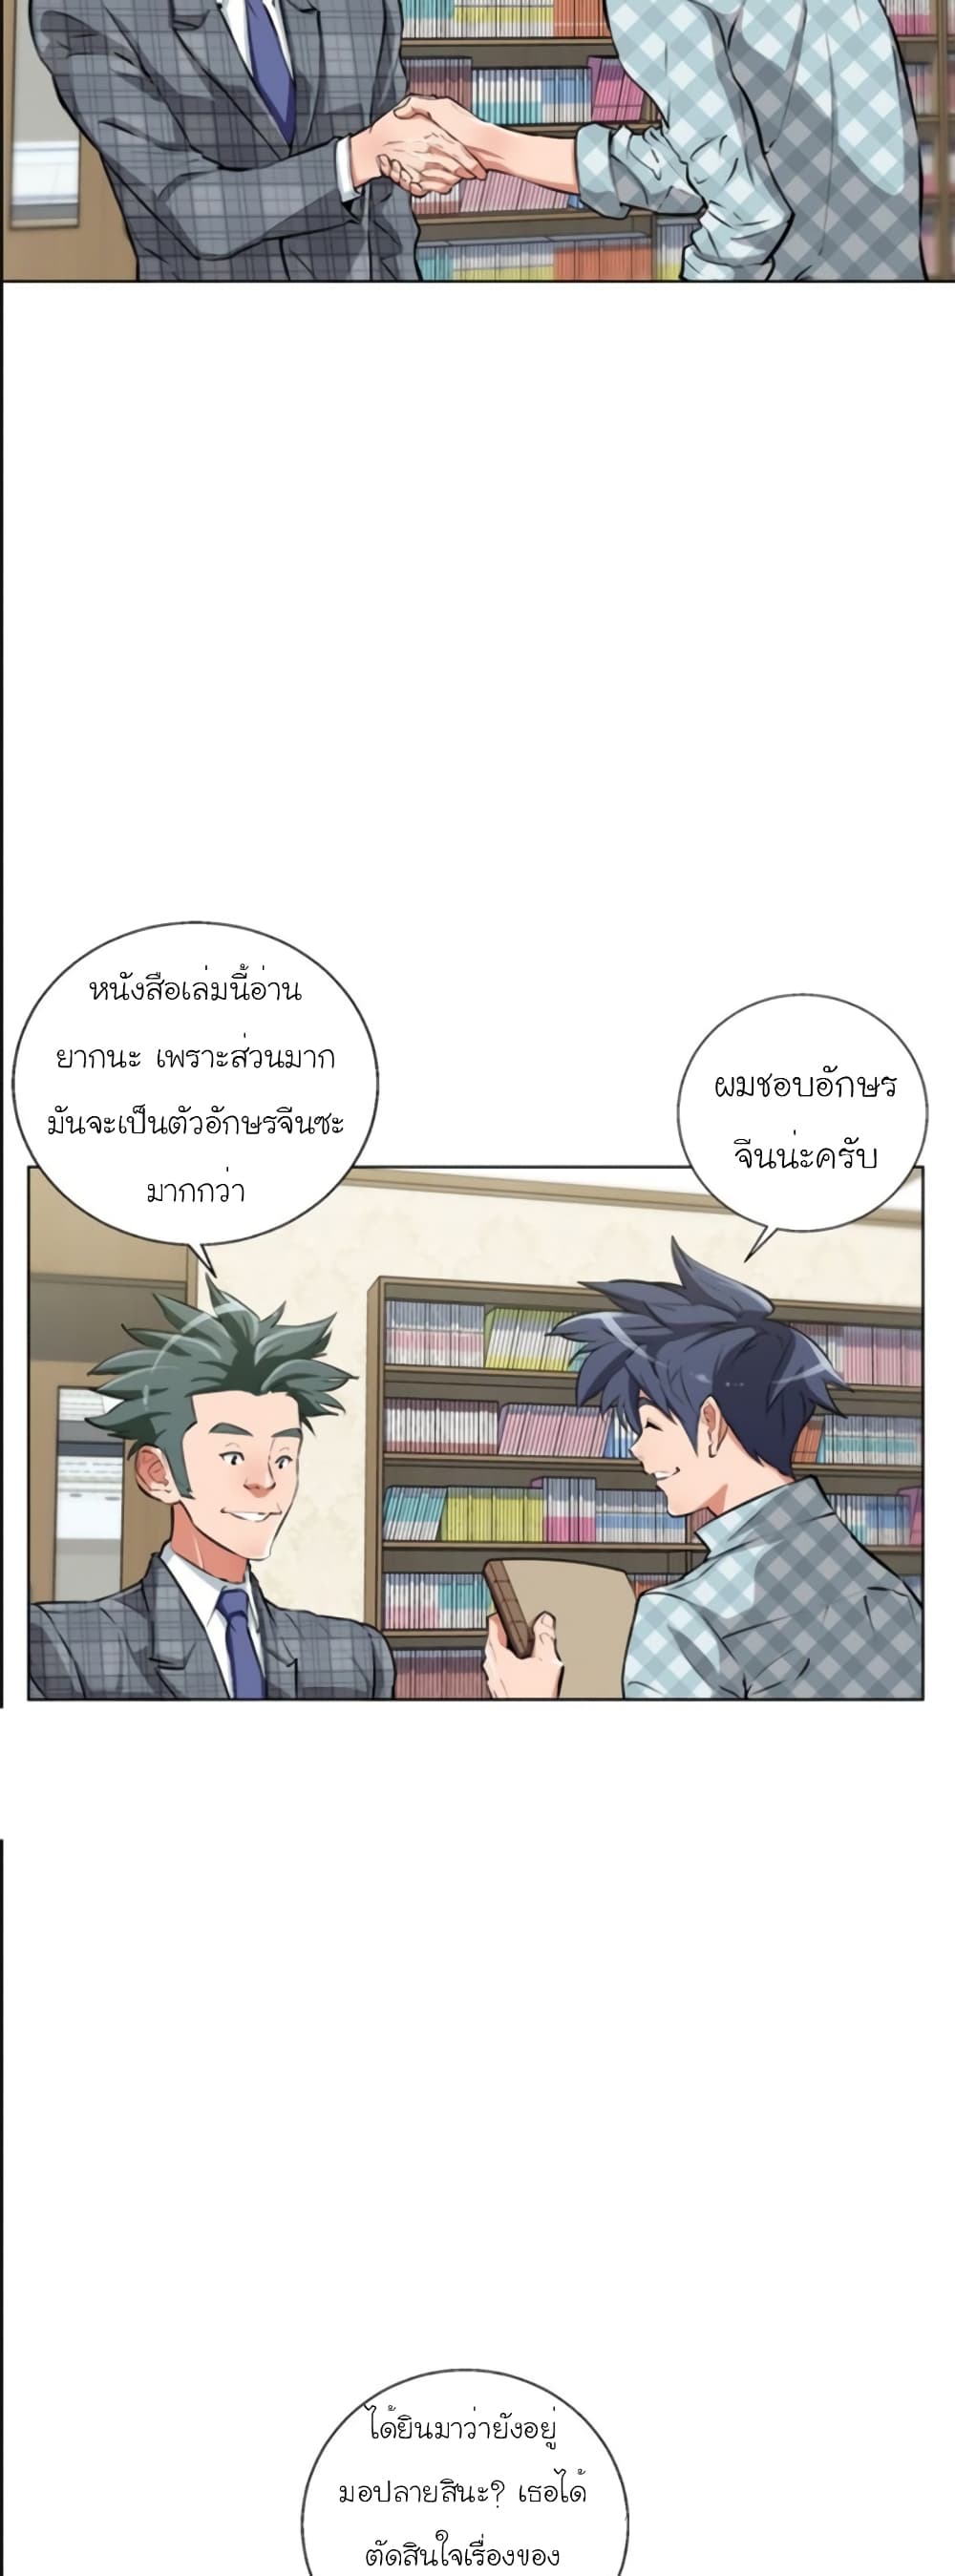 I Stack Experience Through Reading Books ตอนที่ 50 (14)